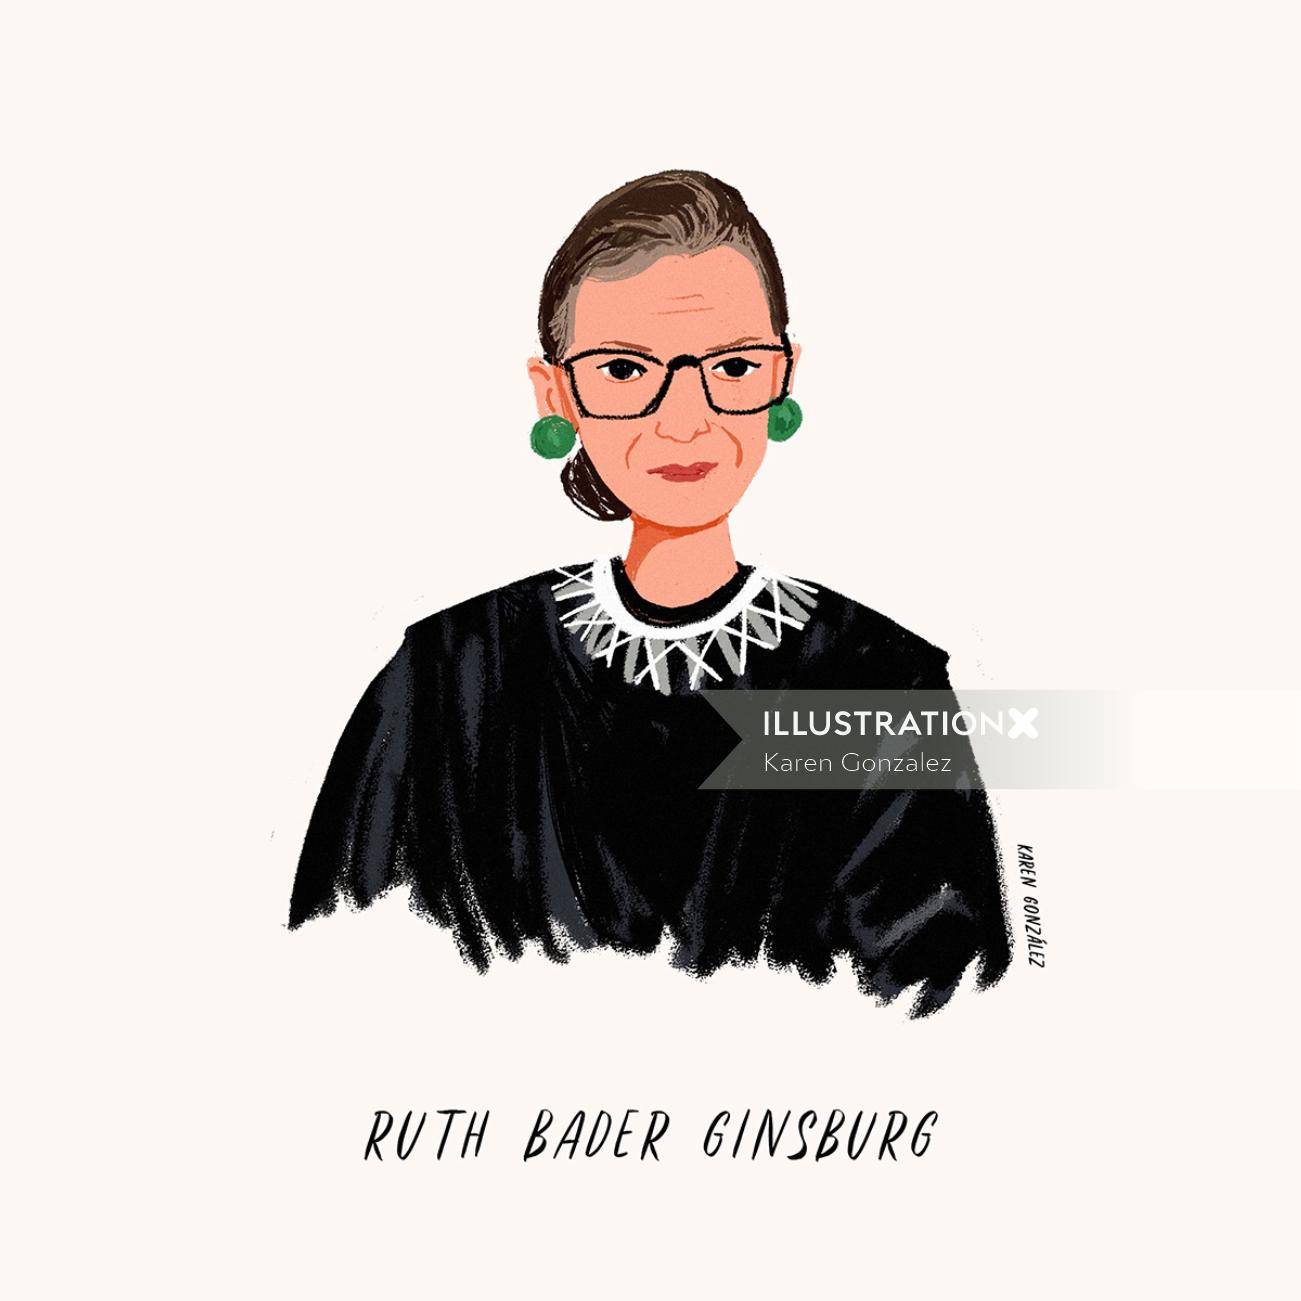 Ruth Bader Ginsburg painting, Former Associate Justice of the US Supreme Court